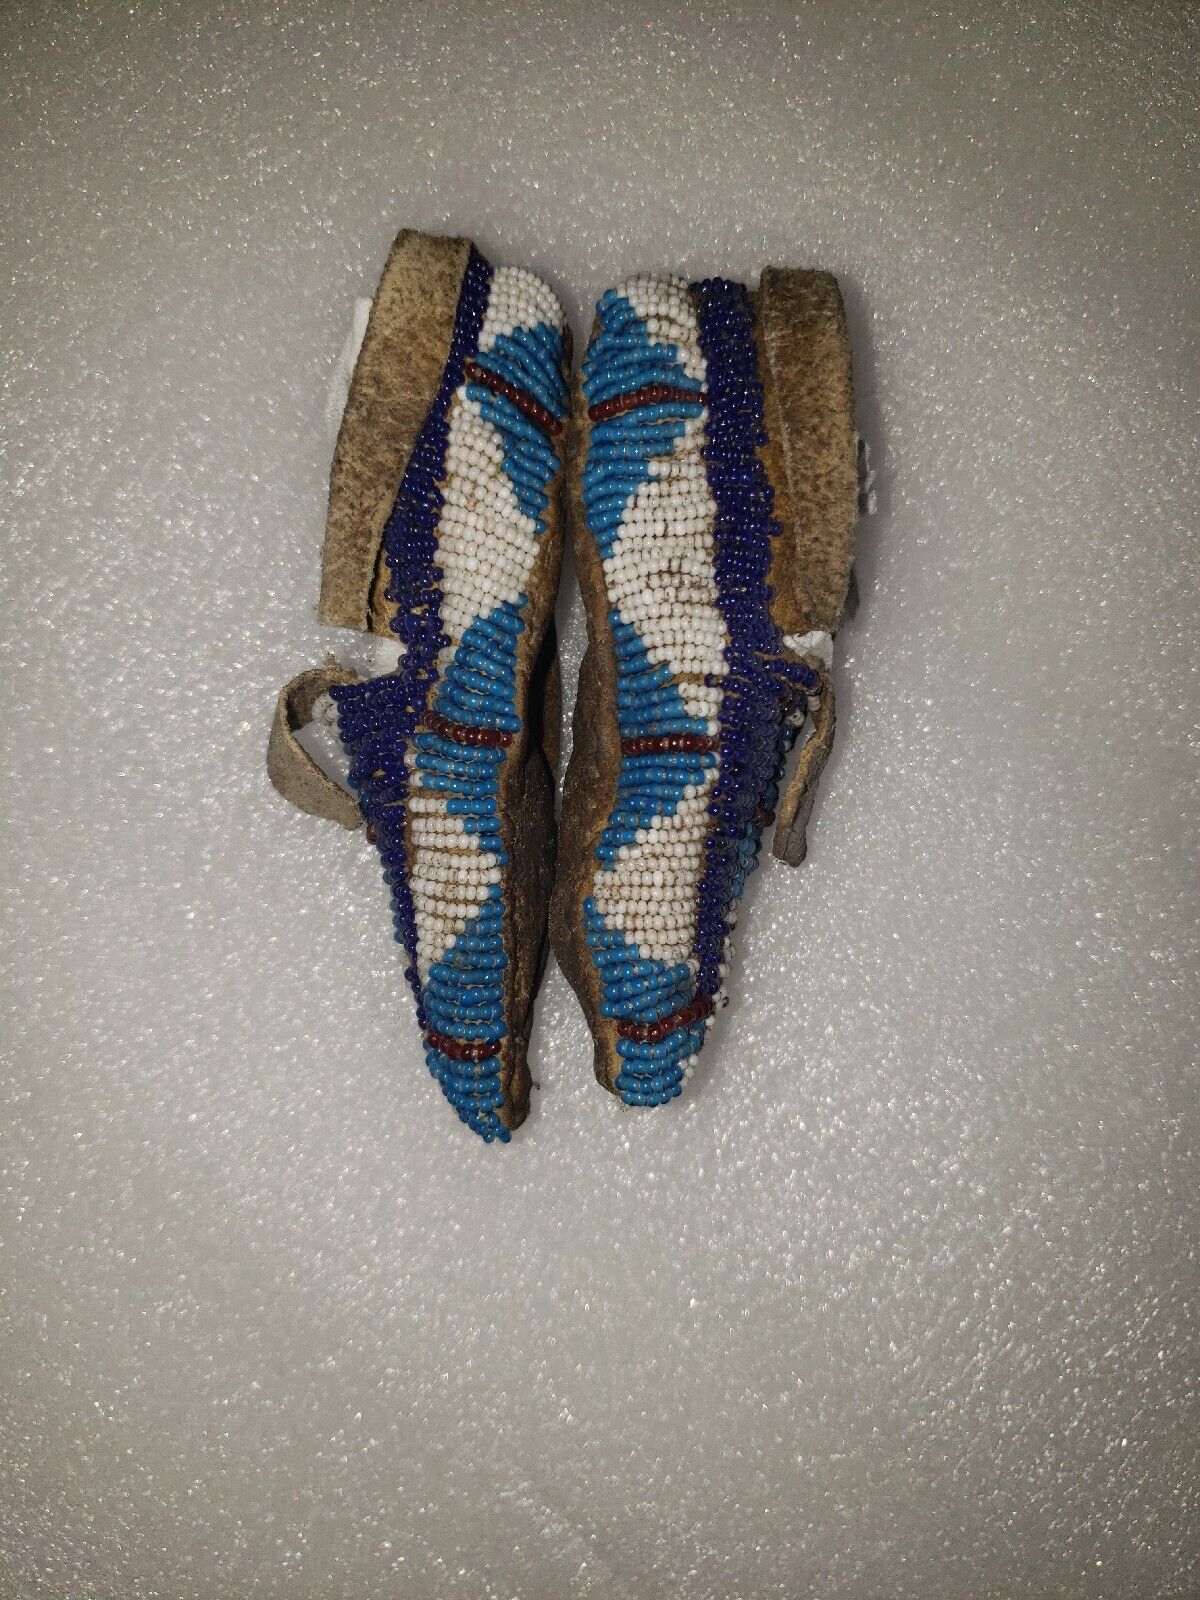 Native American Beaded Baby Lakota Sioux  Moccasins 1800s plains indian